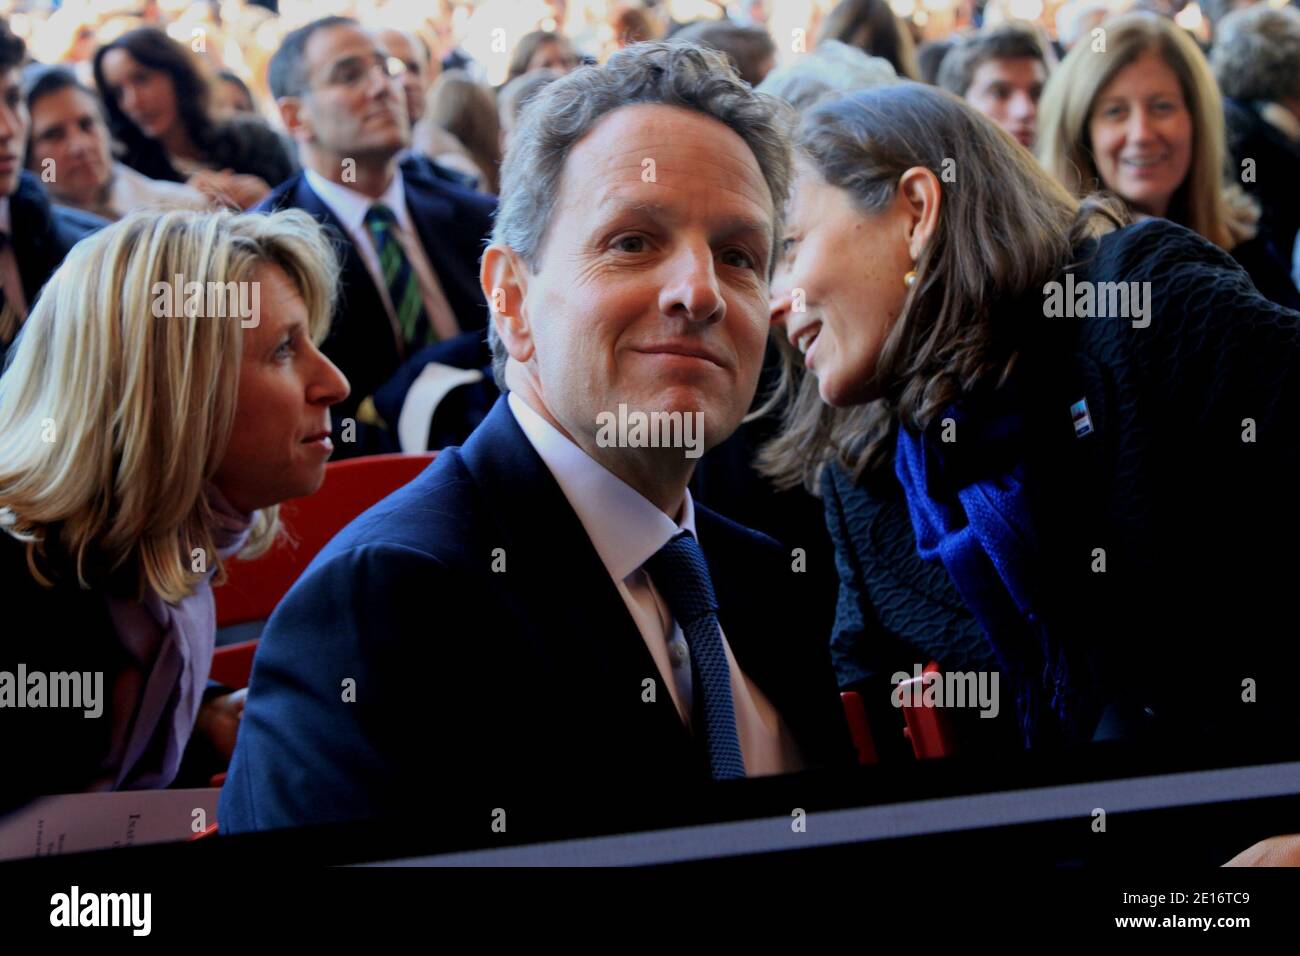 Tim Geithner and wife during inaugural ceremonies for Chicago Mayor-elect Rahm Emanuel. Former white house chief of staff Rahm Emanuel gets sworn in as mayor of Chicago during an inaugural ceremony that included politicians and family members in attendance at Millenium Park in Chicago, Illinois on May 16, 2011. Photo by Alexandra Buxbaum/ABACAPRESS.COM Stock Photo